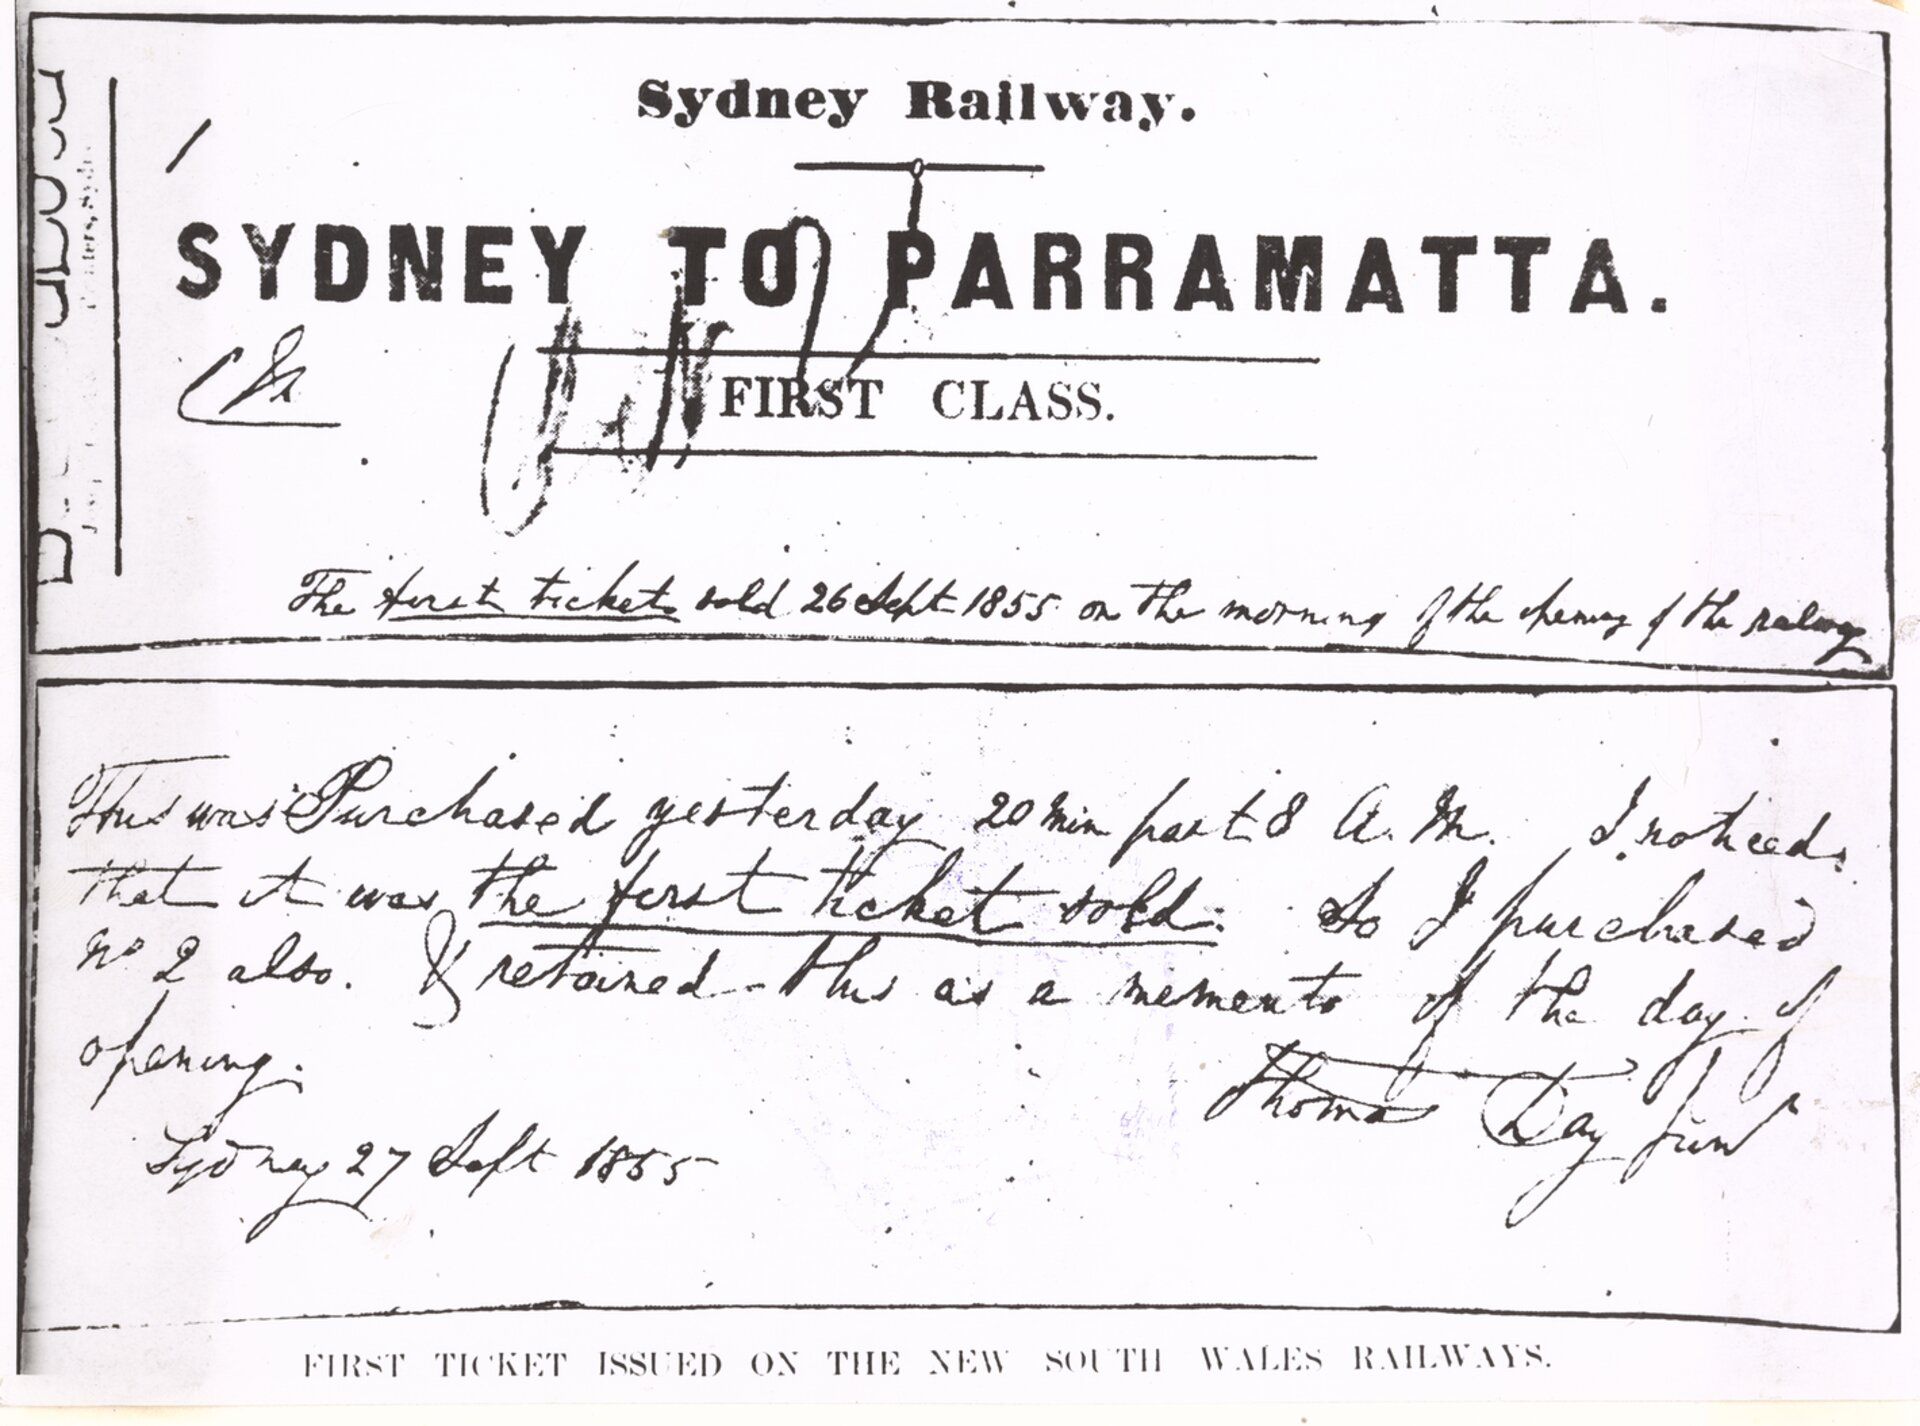 Copy of the first ticket sold on the Sydney train network in 1855